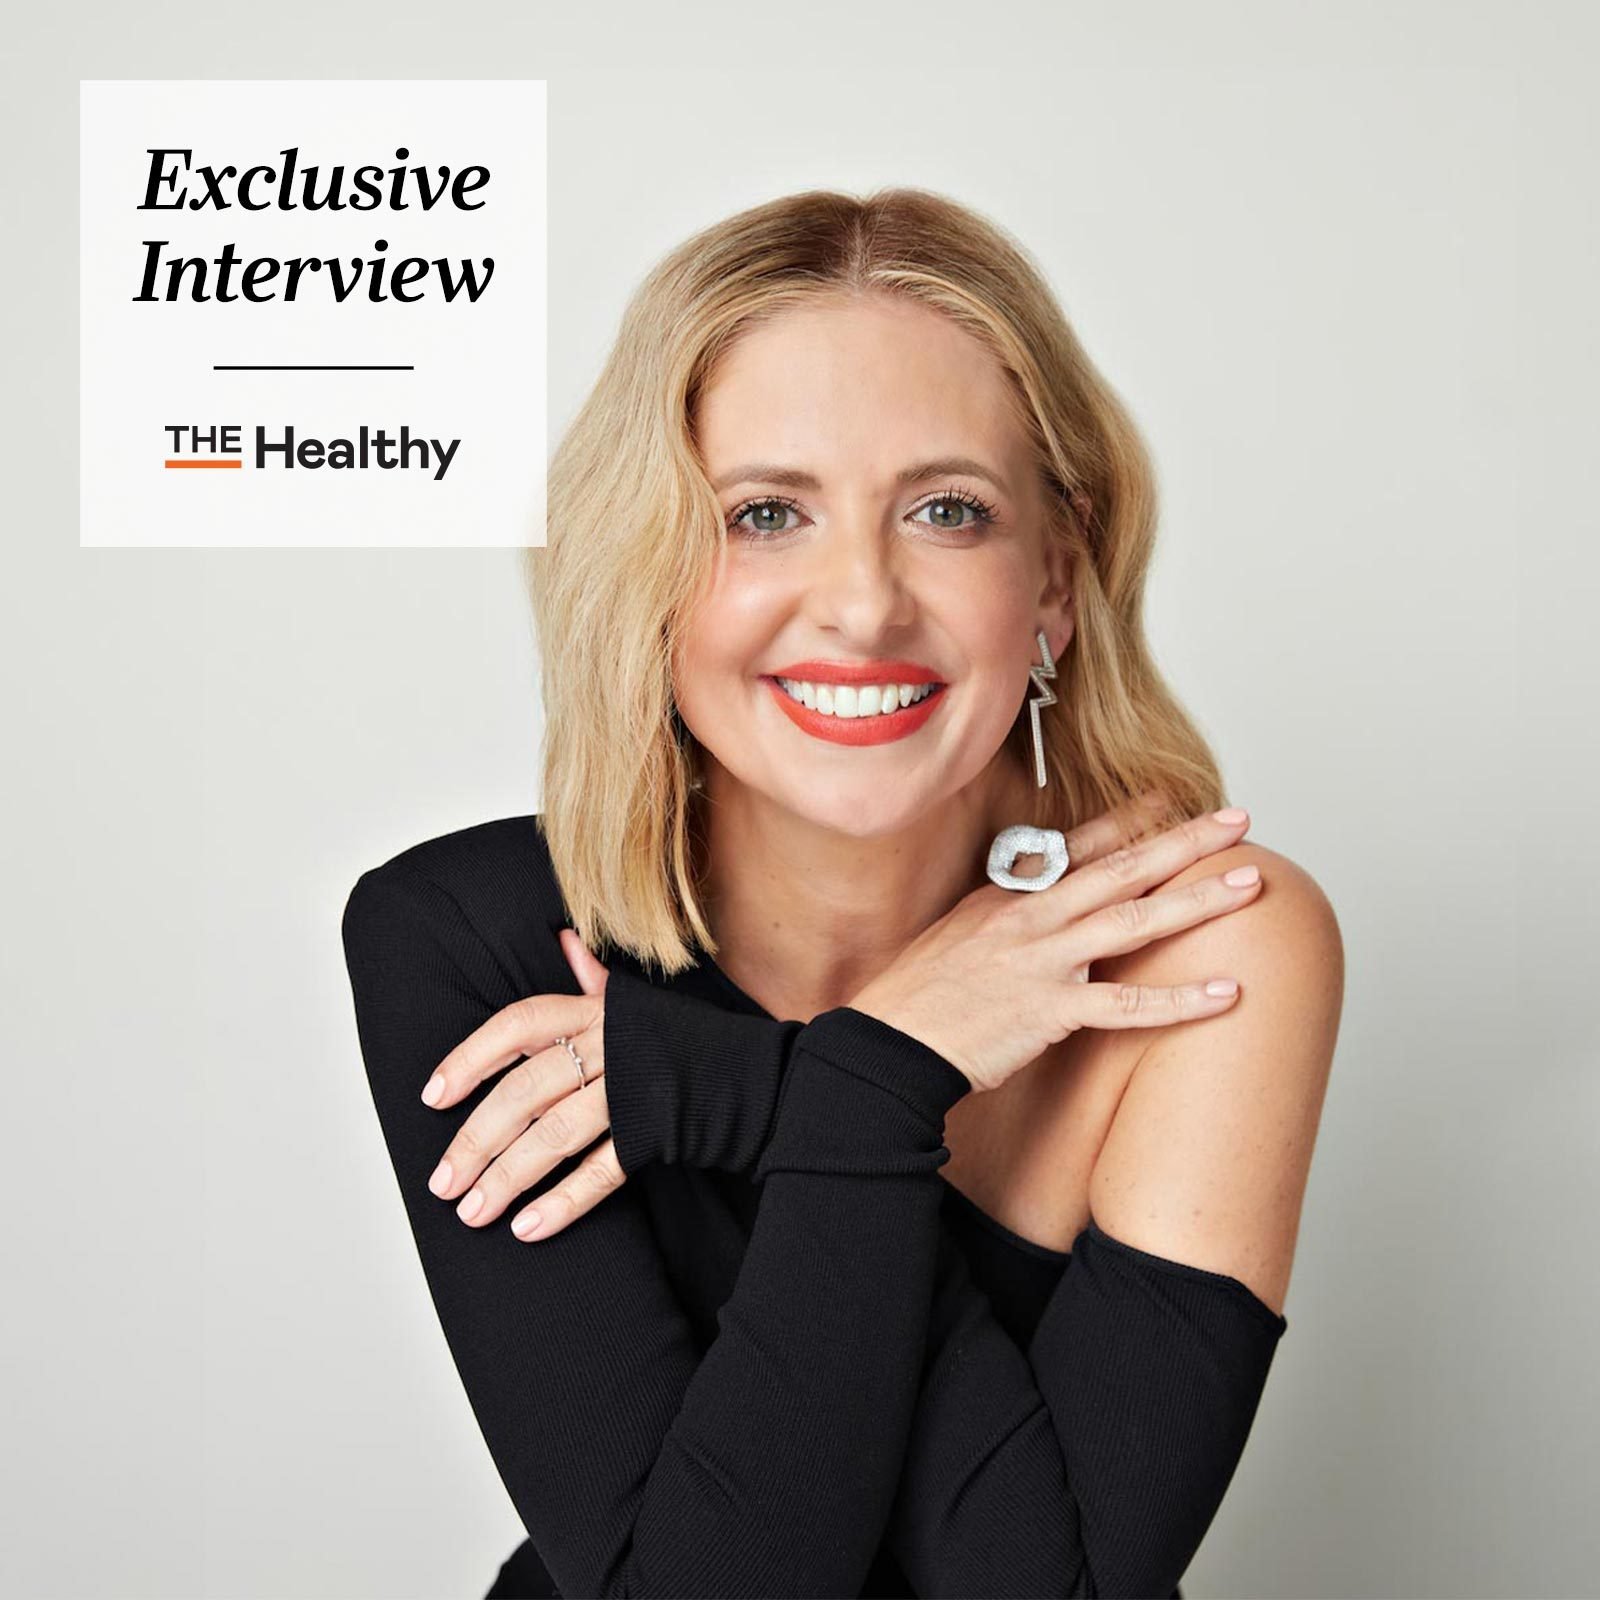 Sarah Michelle Gellar on the Power of Unplugging: "Everyone You're Around Is Happier"